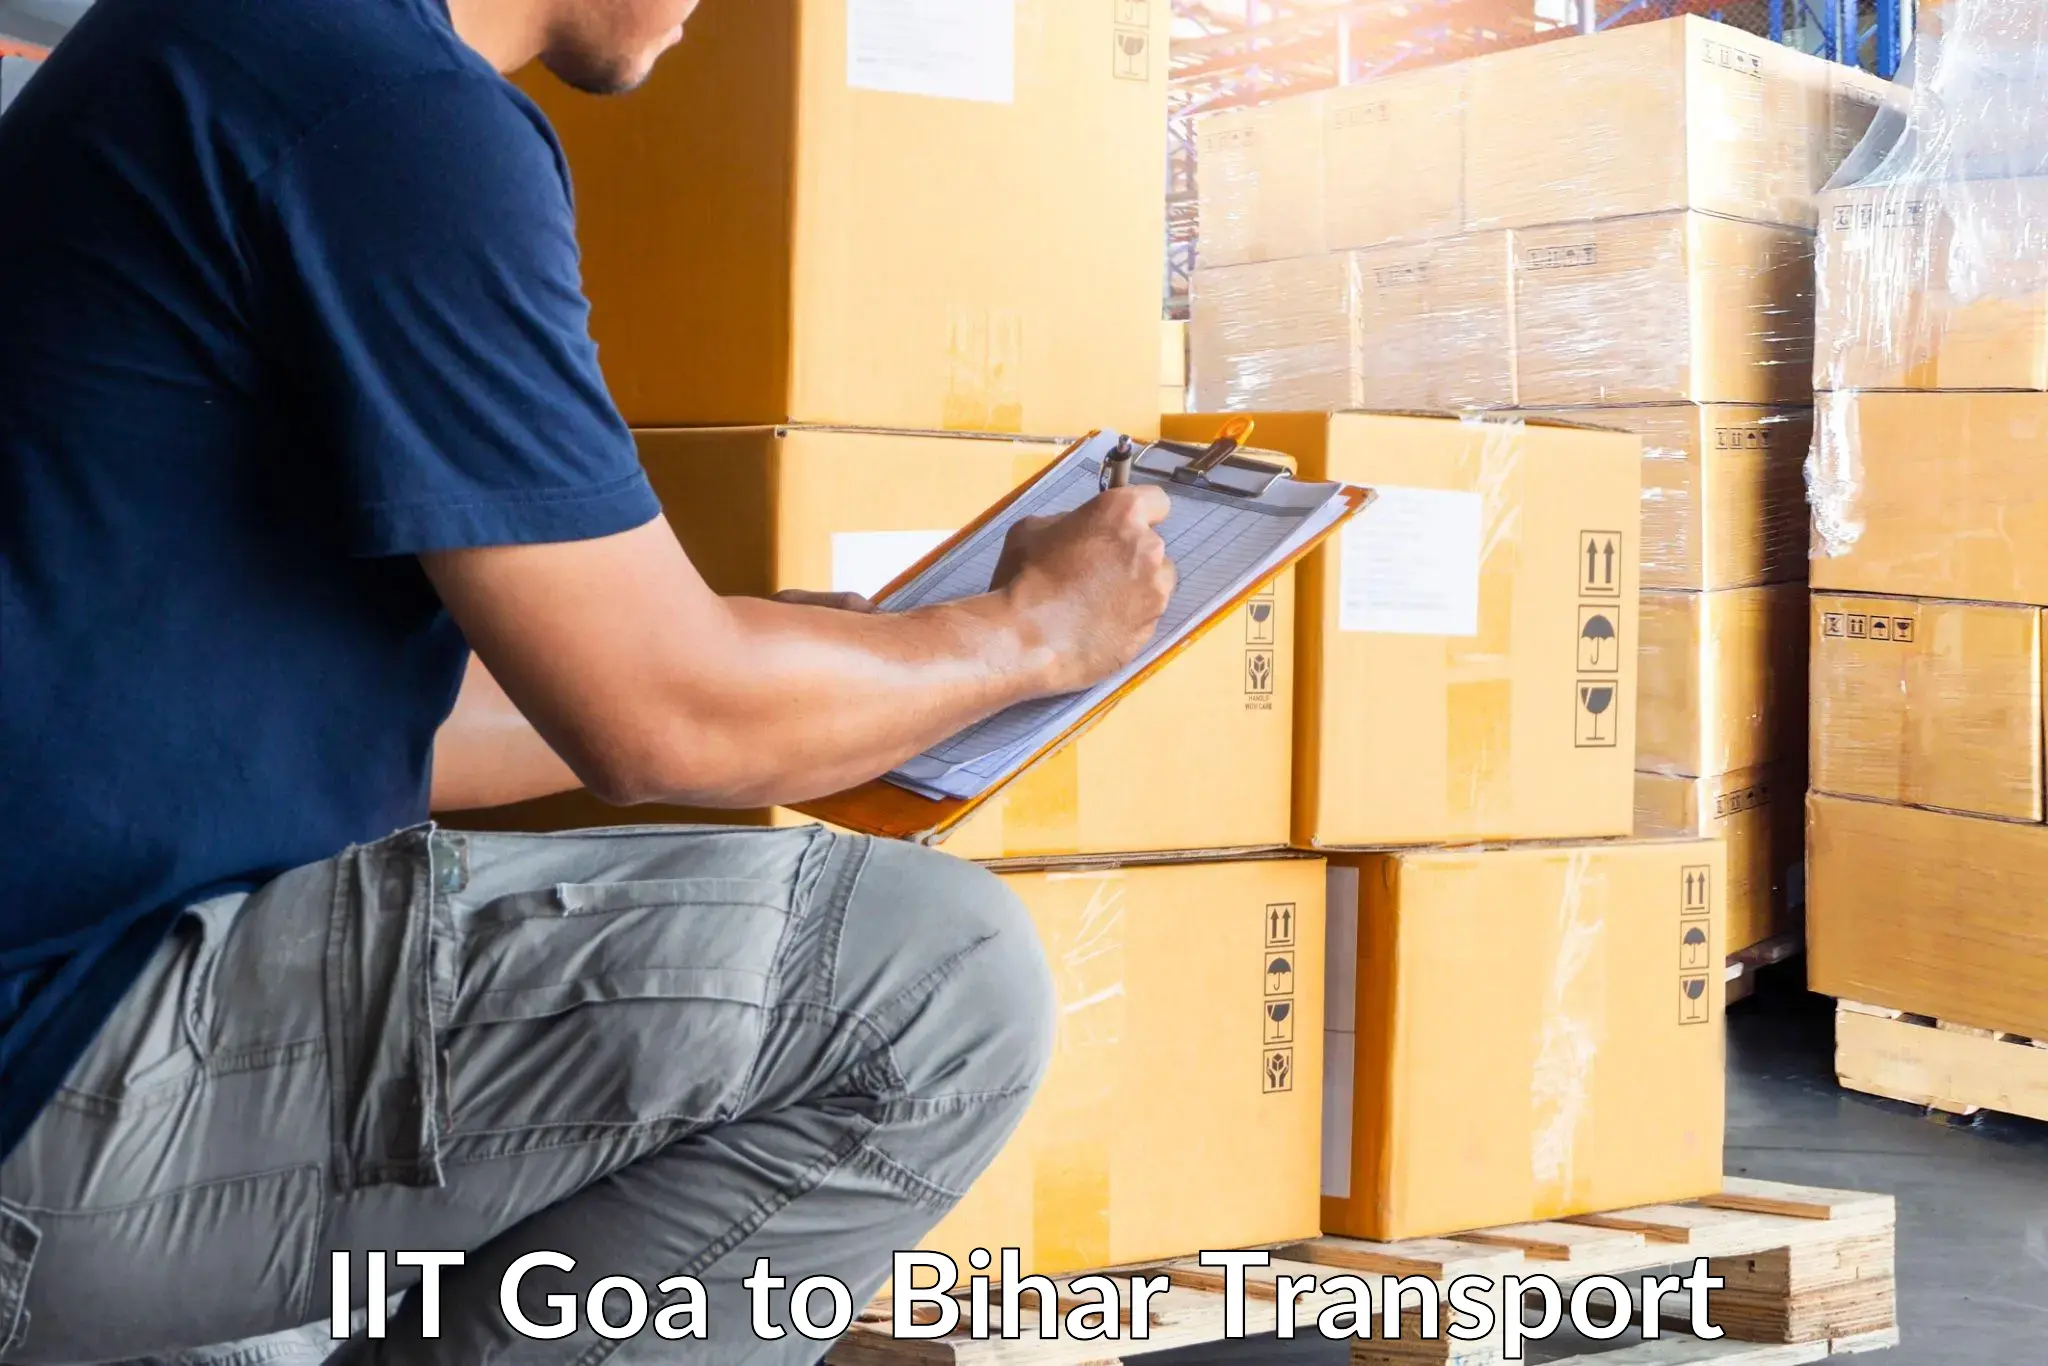 Commercial transport service IIT Goa to Piro